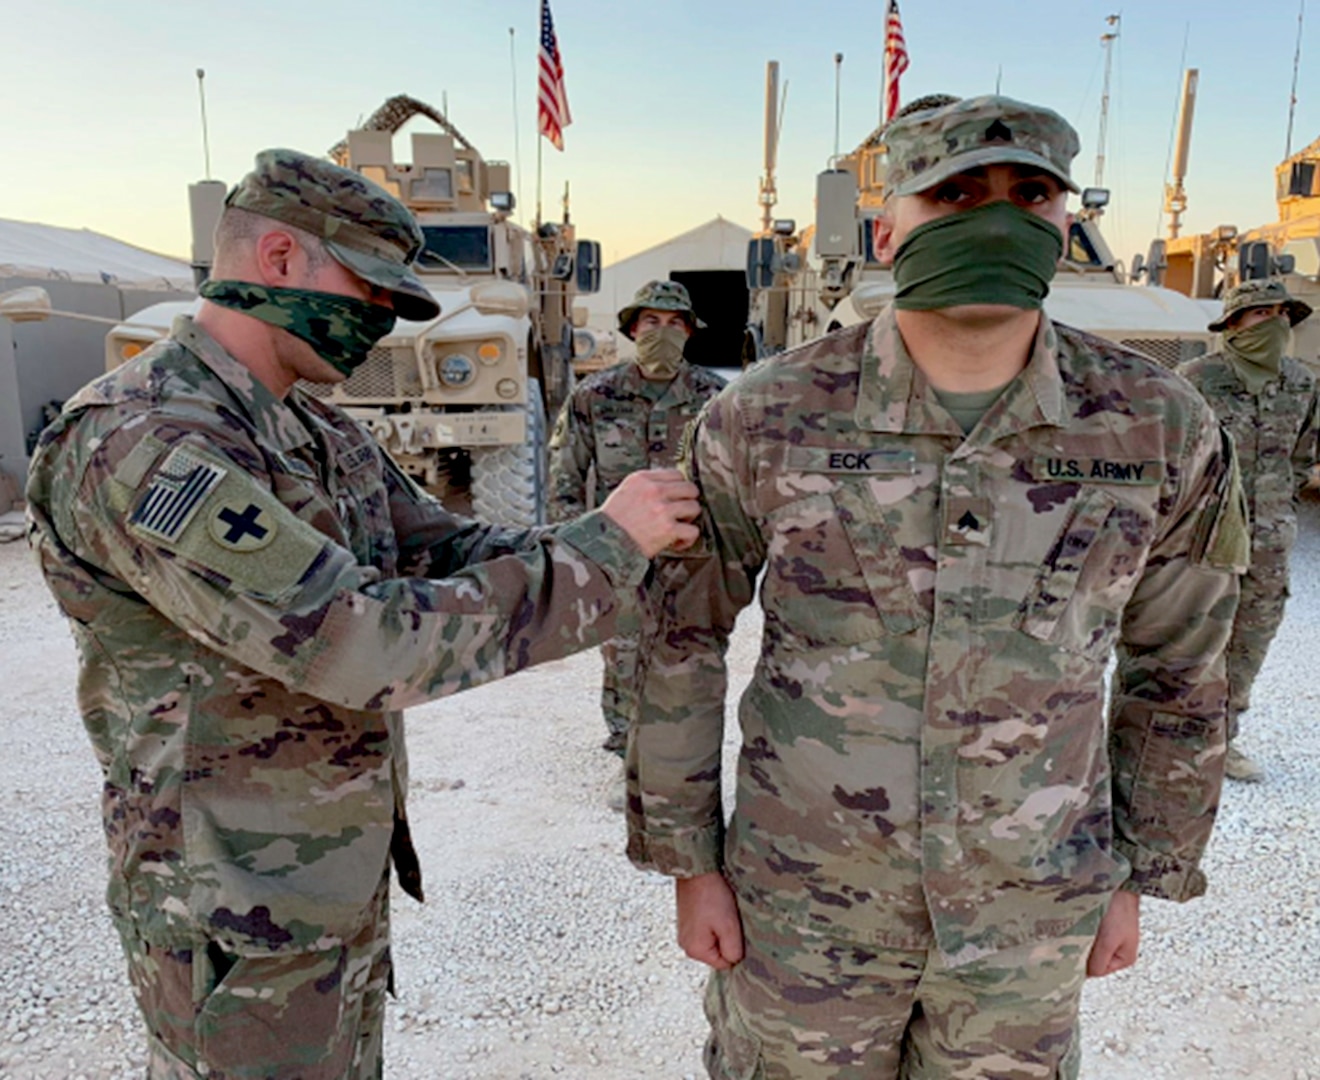 Staff Sgt. Alexander Koroyanis, of Loda, Illinois, squad leader for Company B, 2nd Battalion, 130th Infantry Regiment, based in Effingham, Illinois, presents Sgt. Joseph Eck, of Owensville, Indiana, with his combat patch during the ceremony.